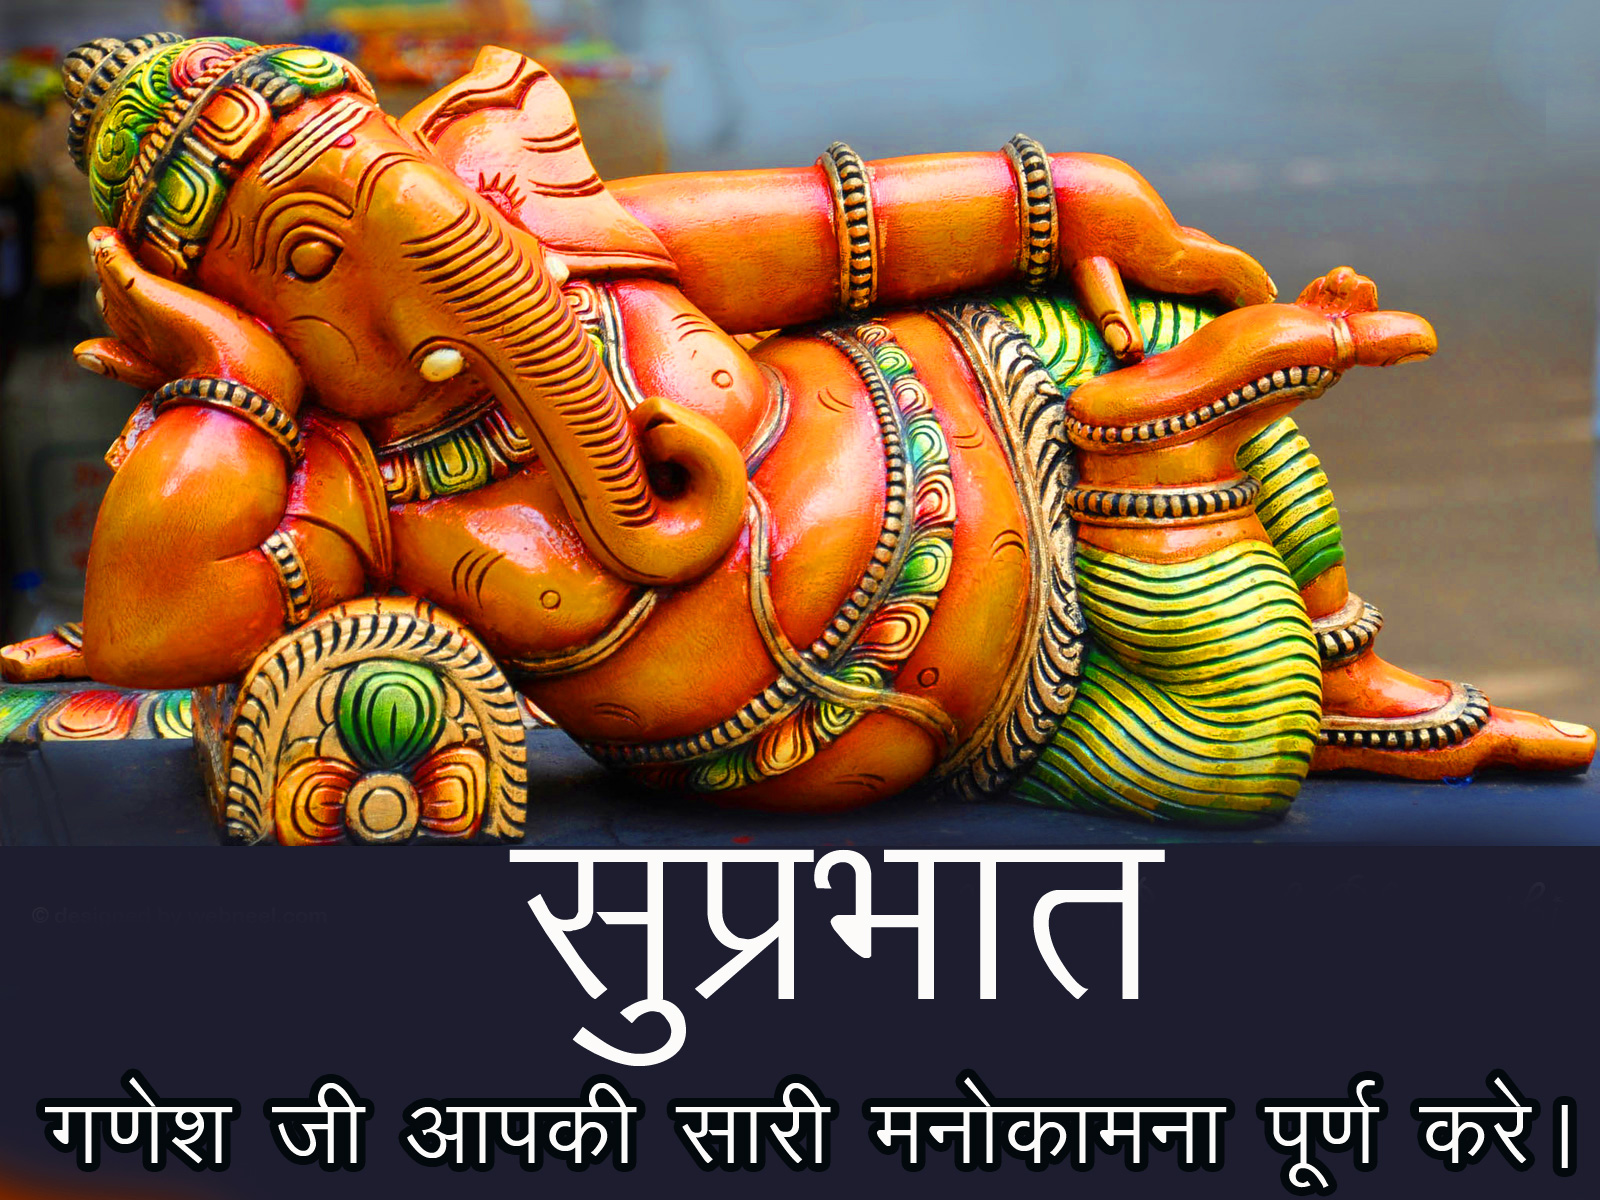 57 Latest God Suprabhat Images Hd Free Download For Mobile Good Morning